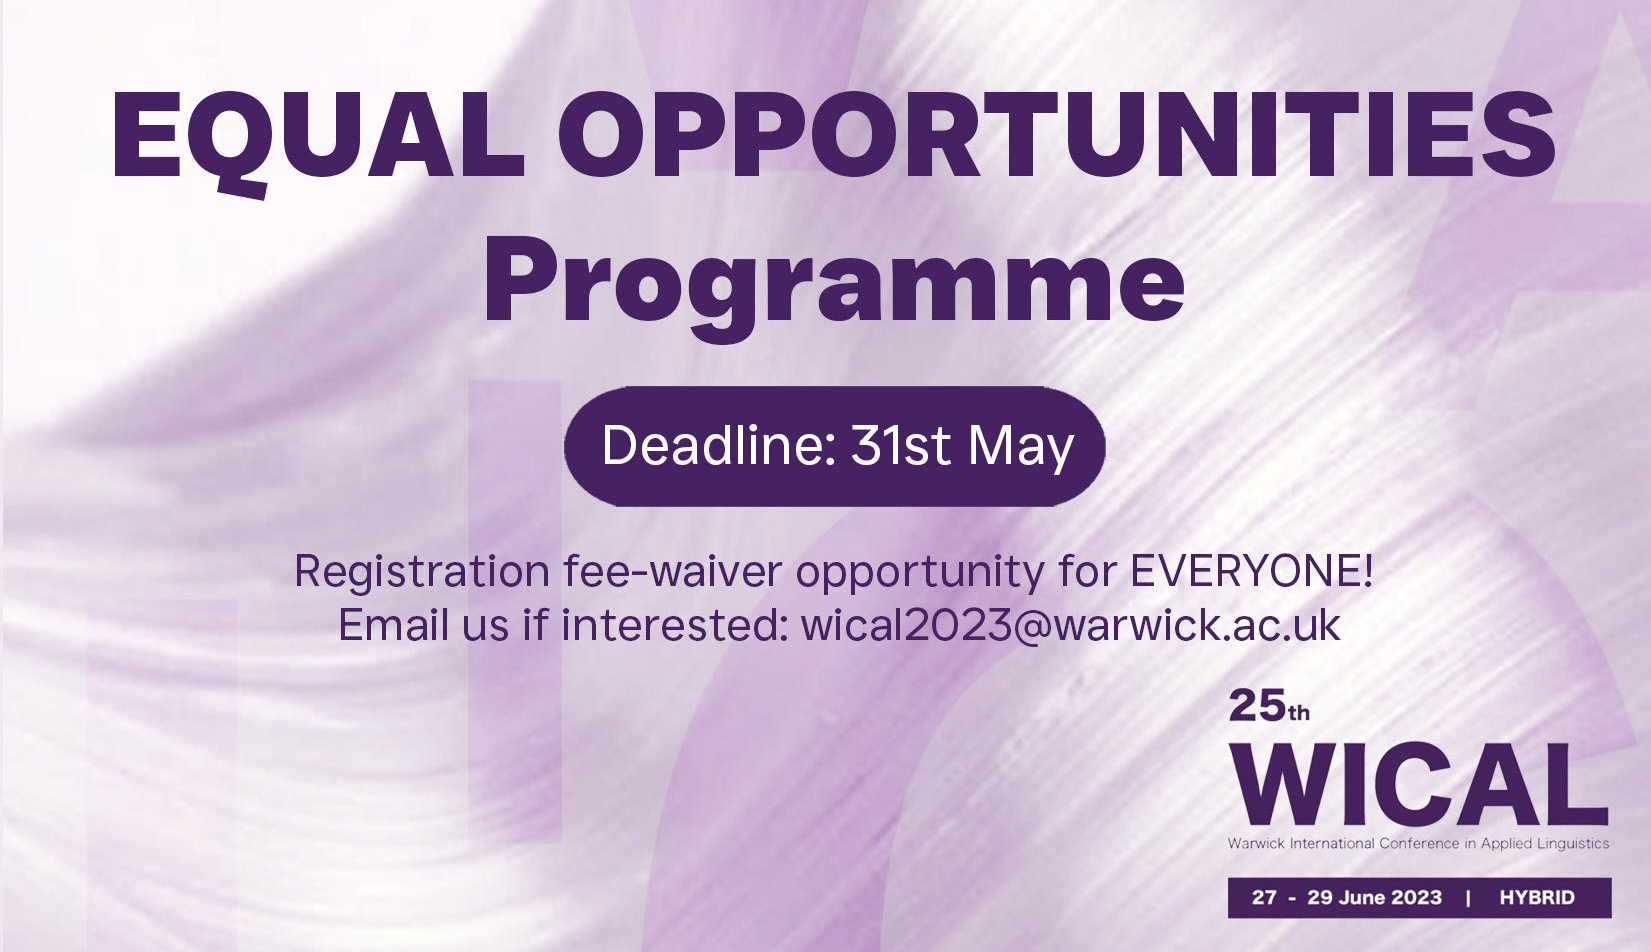 Equal Opportunities Programme Deadline 31 May. Registration fee-waiver opportunity for everyone. Email us if interested. wical2022@warwick.ac.uk 